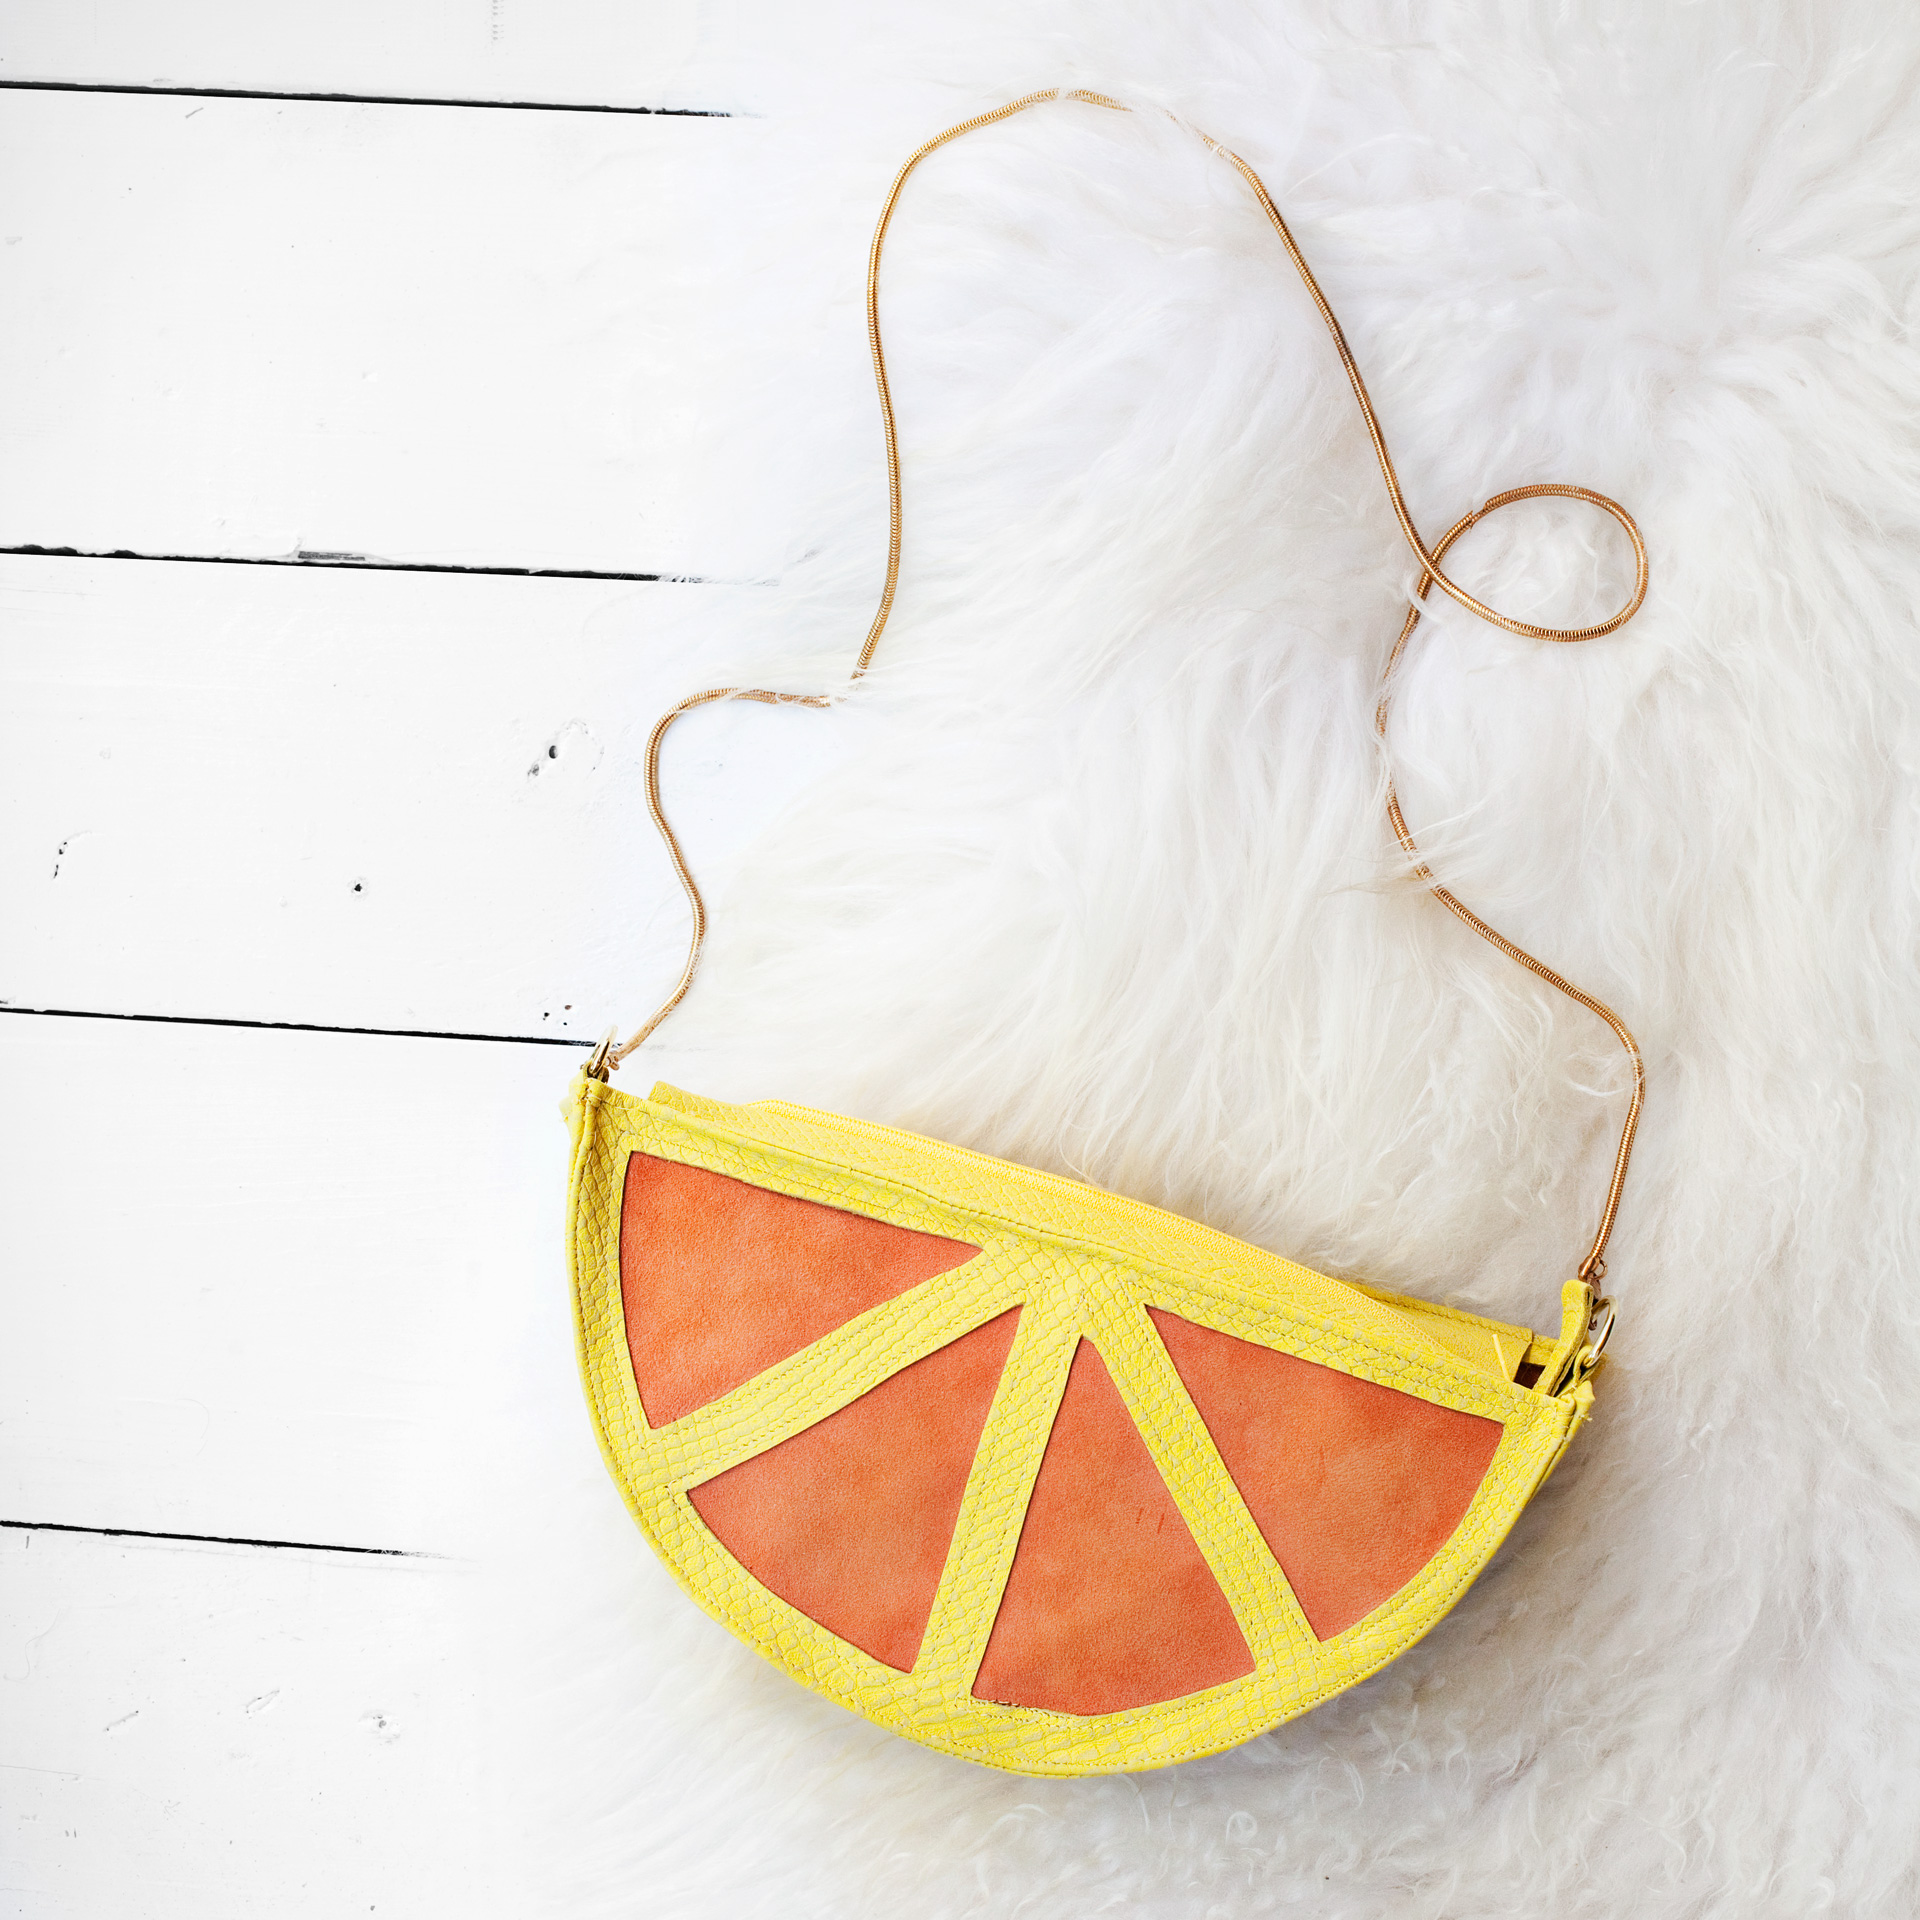 DIY Citrus Slice purse- complete with sewing template and detailed instructions!